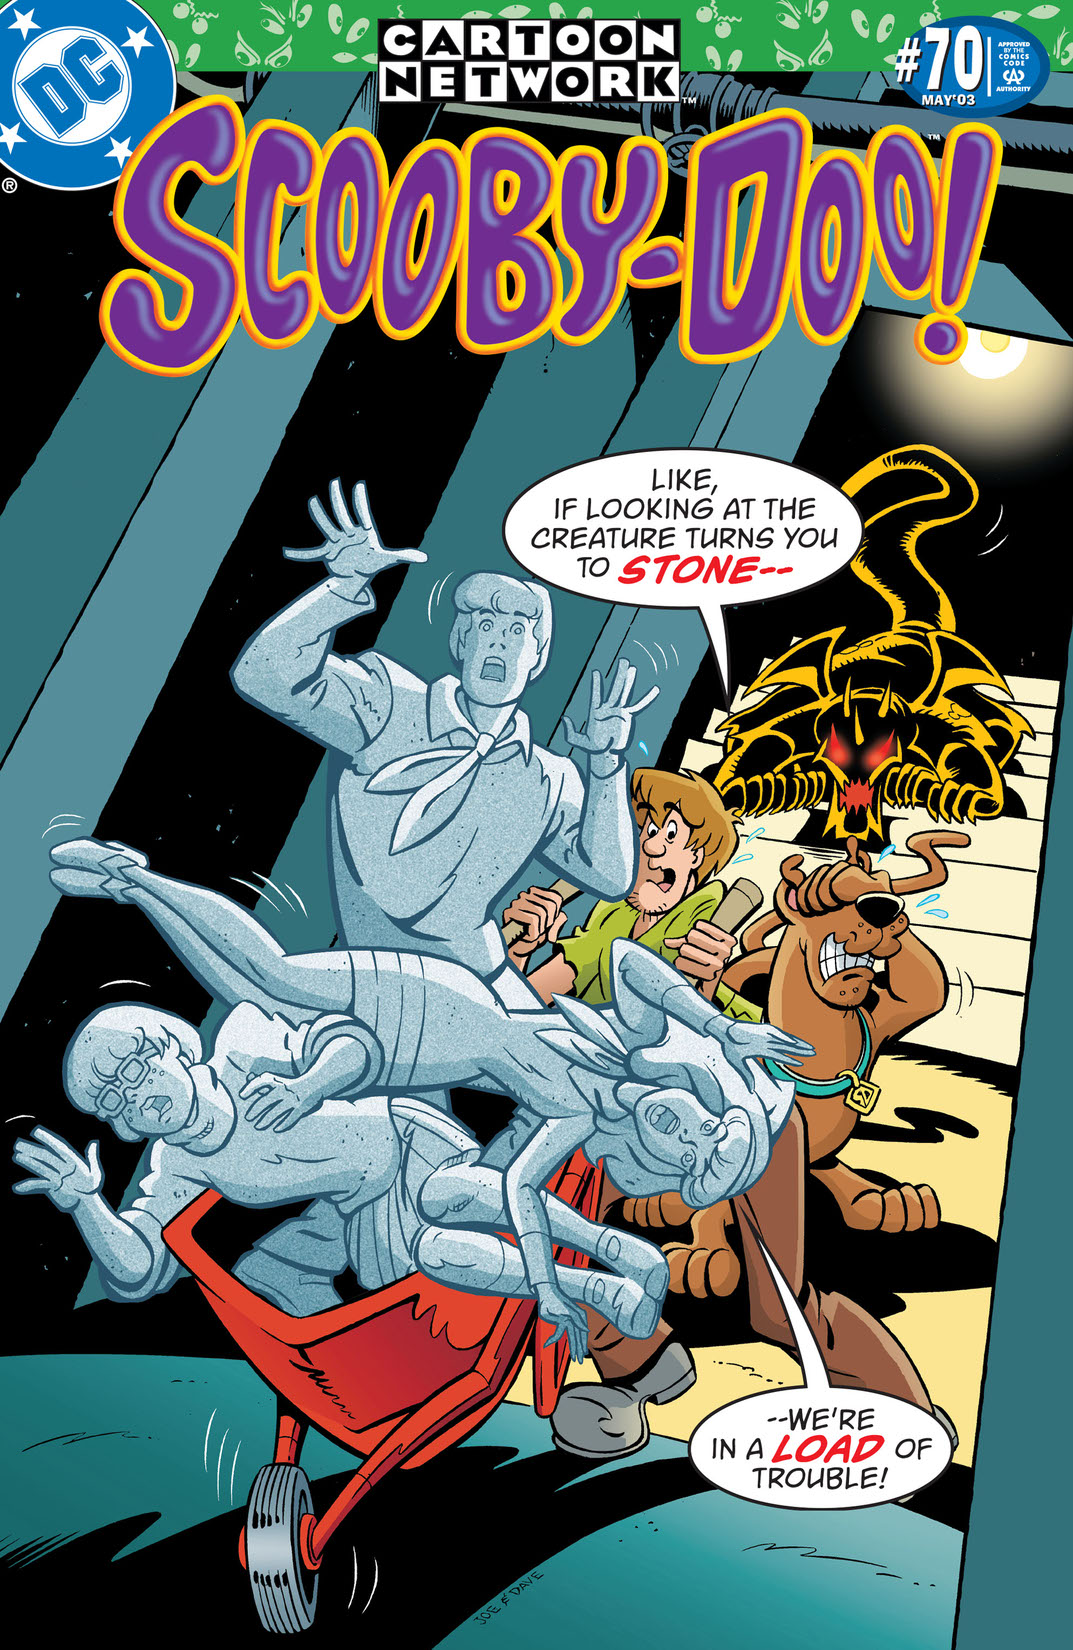 Scooby-Doo #70 preview images